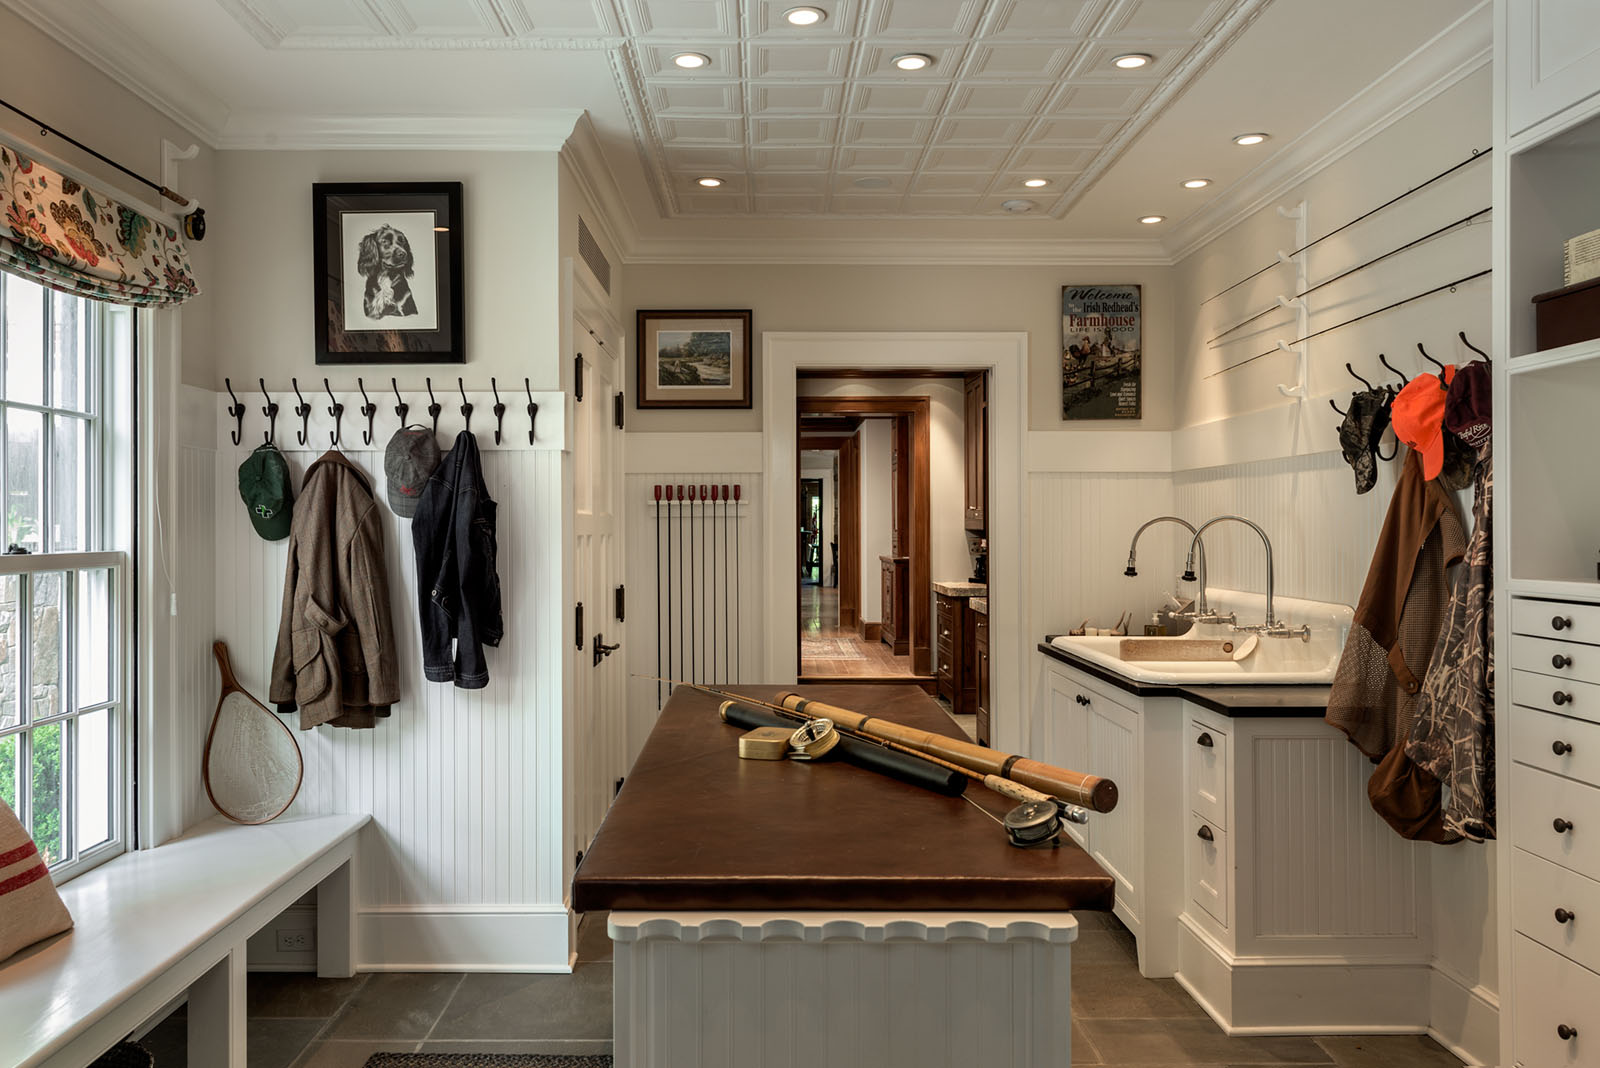 Mudroom for Sport